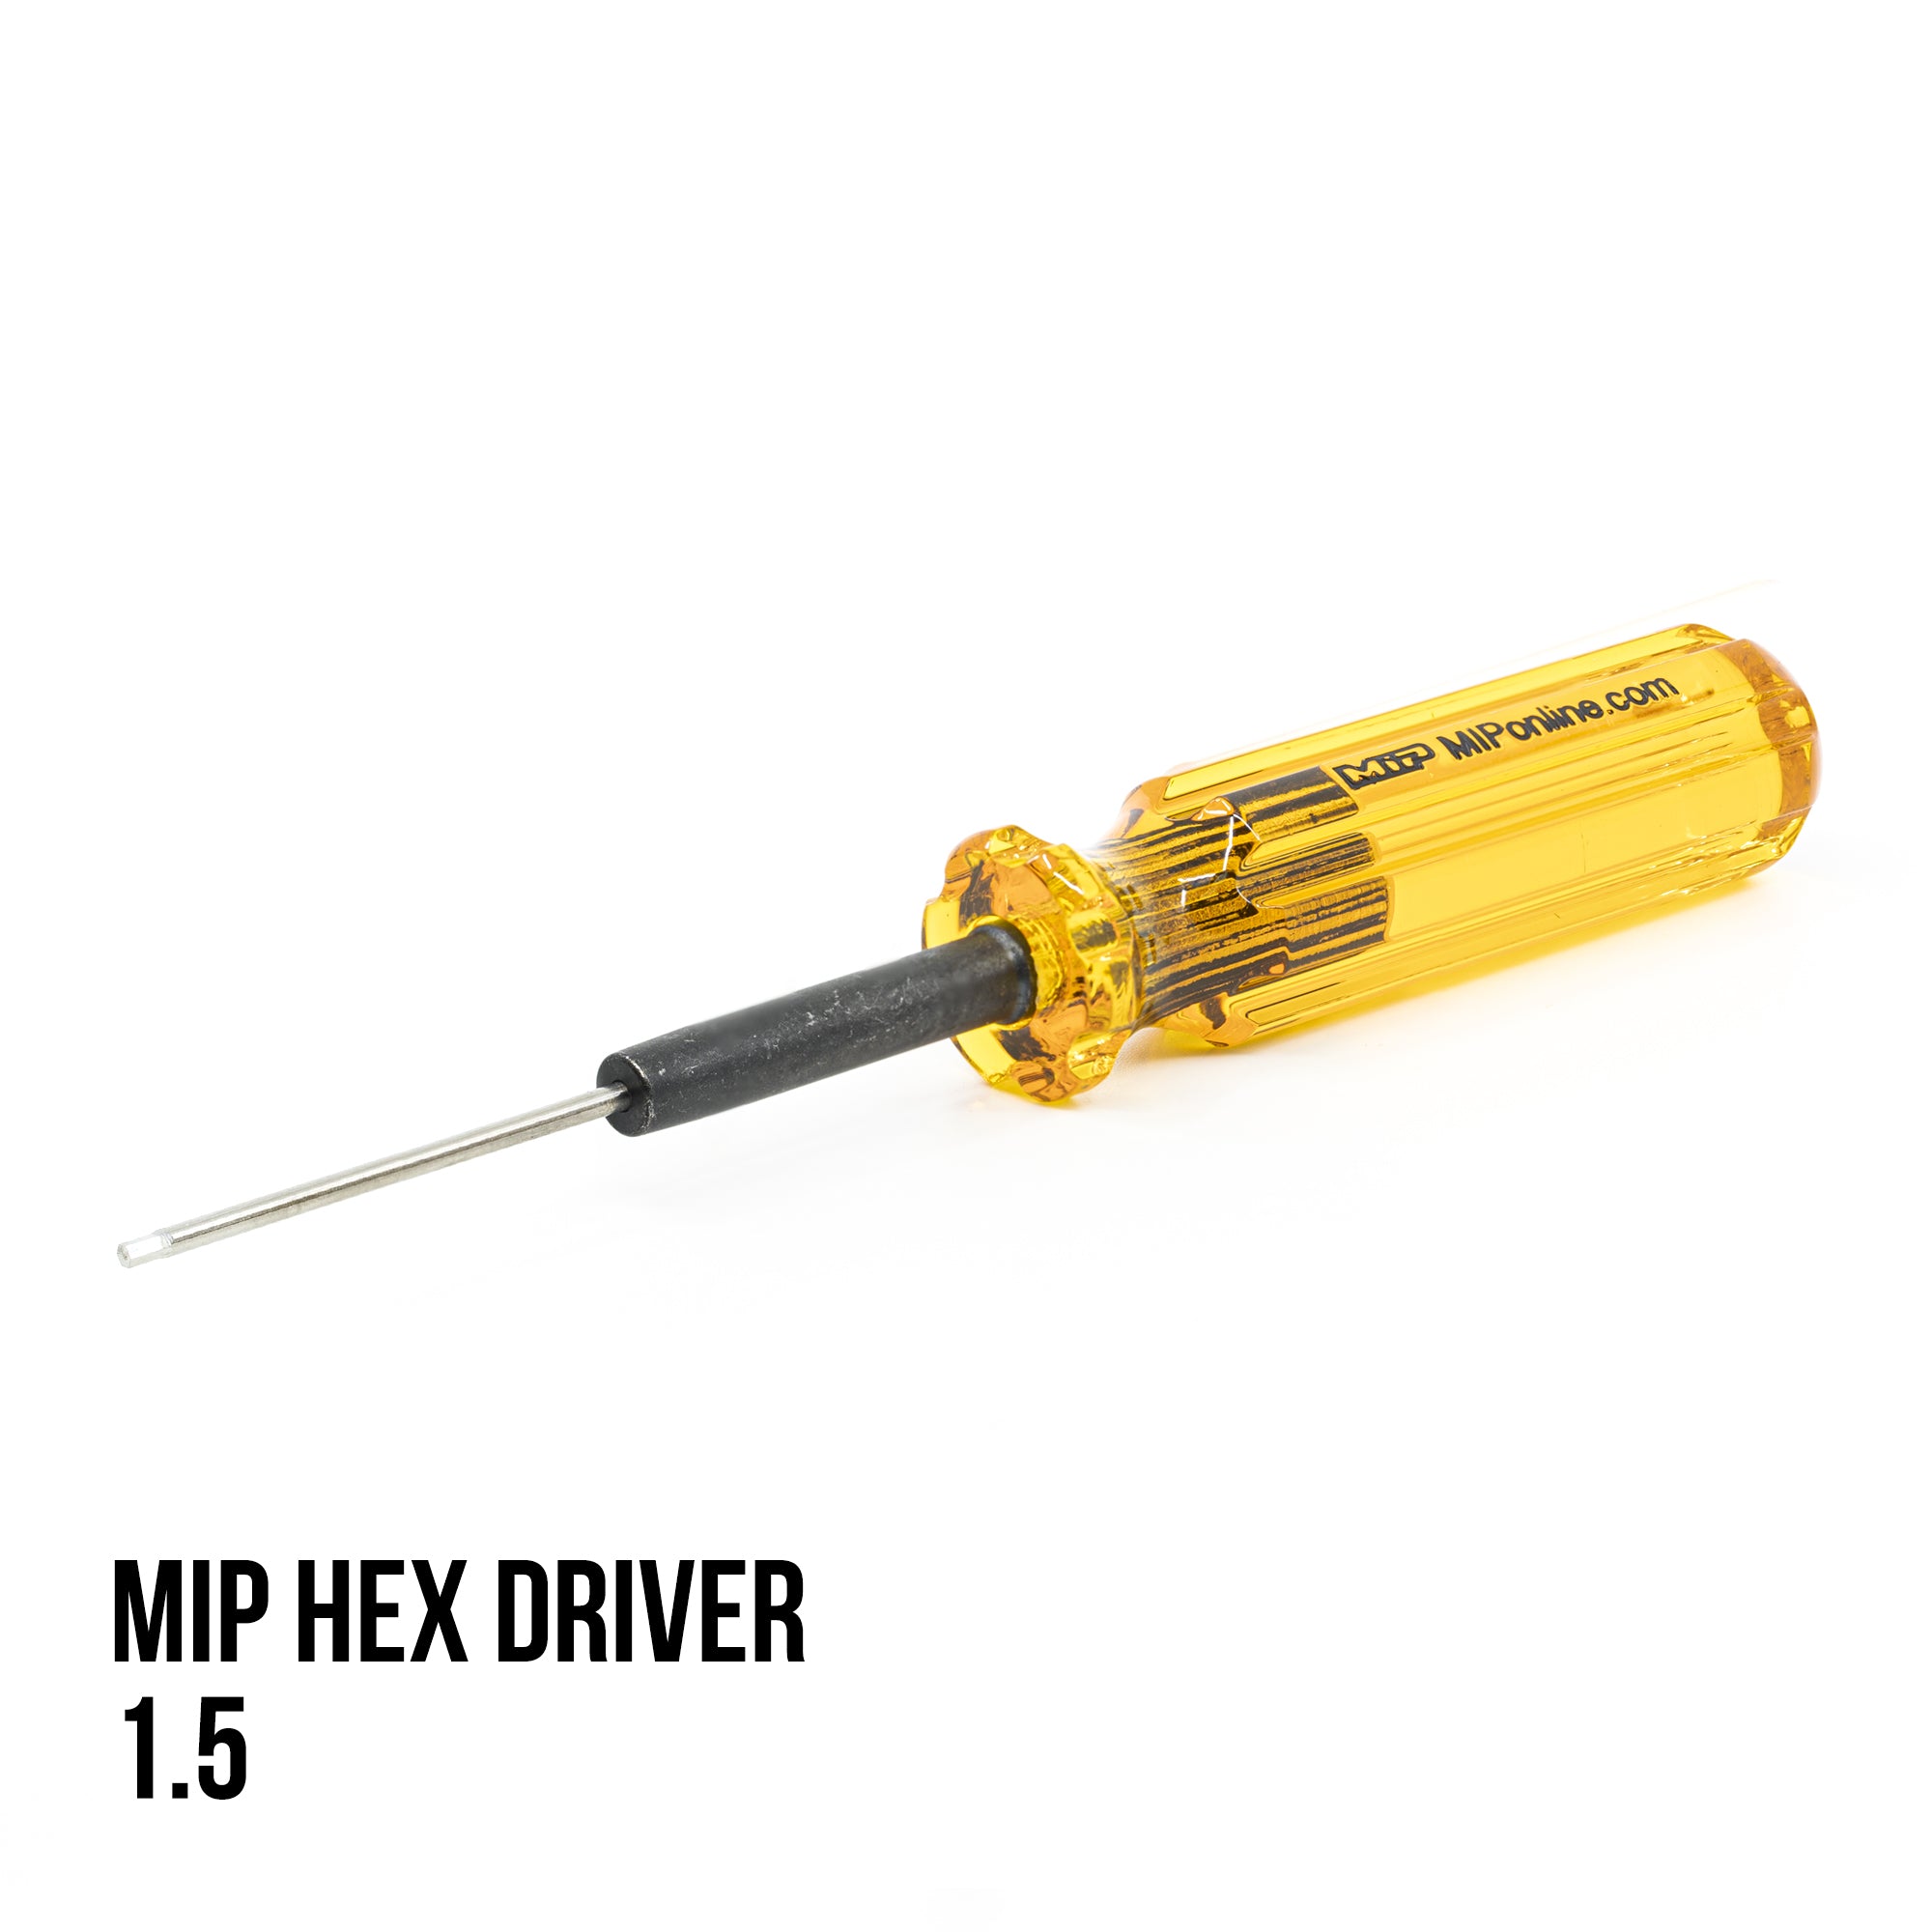 MIP 9007 Hex Driver Wrench 1.5 mm